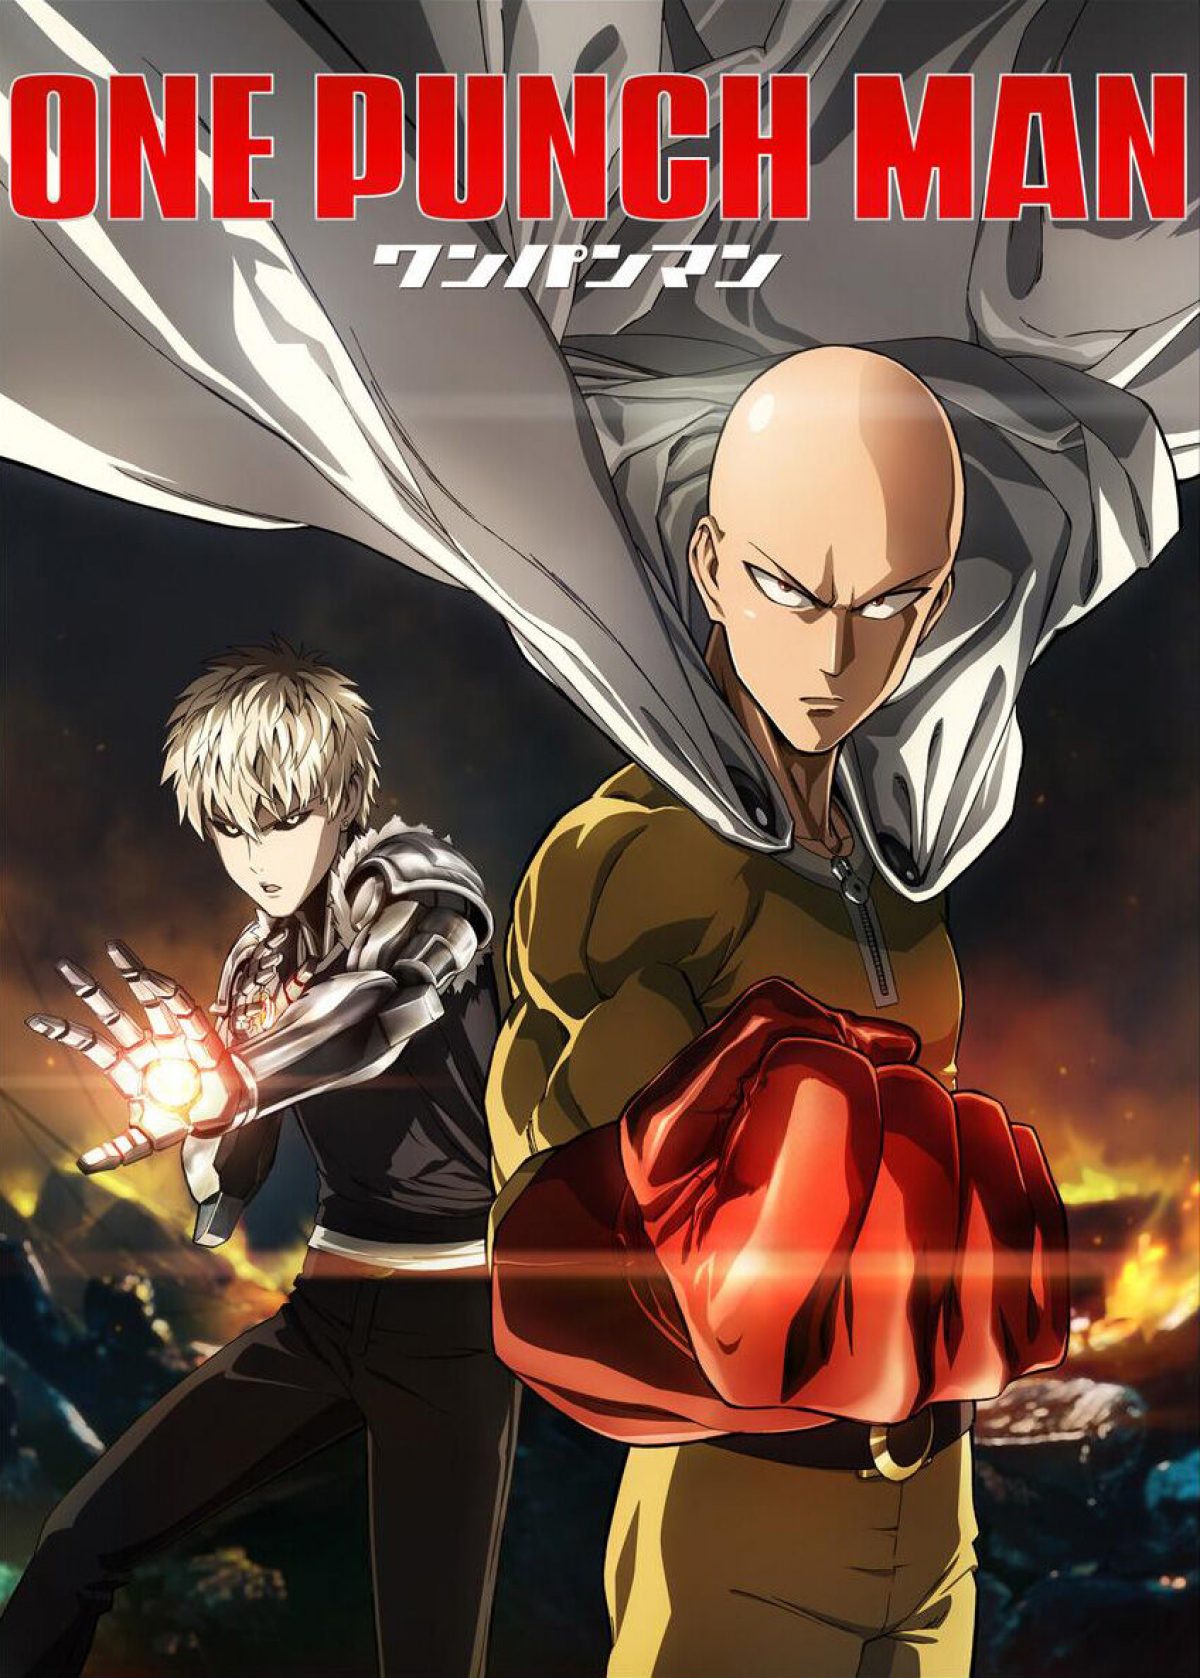 One Punch Man Chapter 148 Release Date Discussion And Watch Online